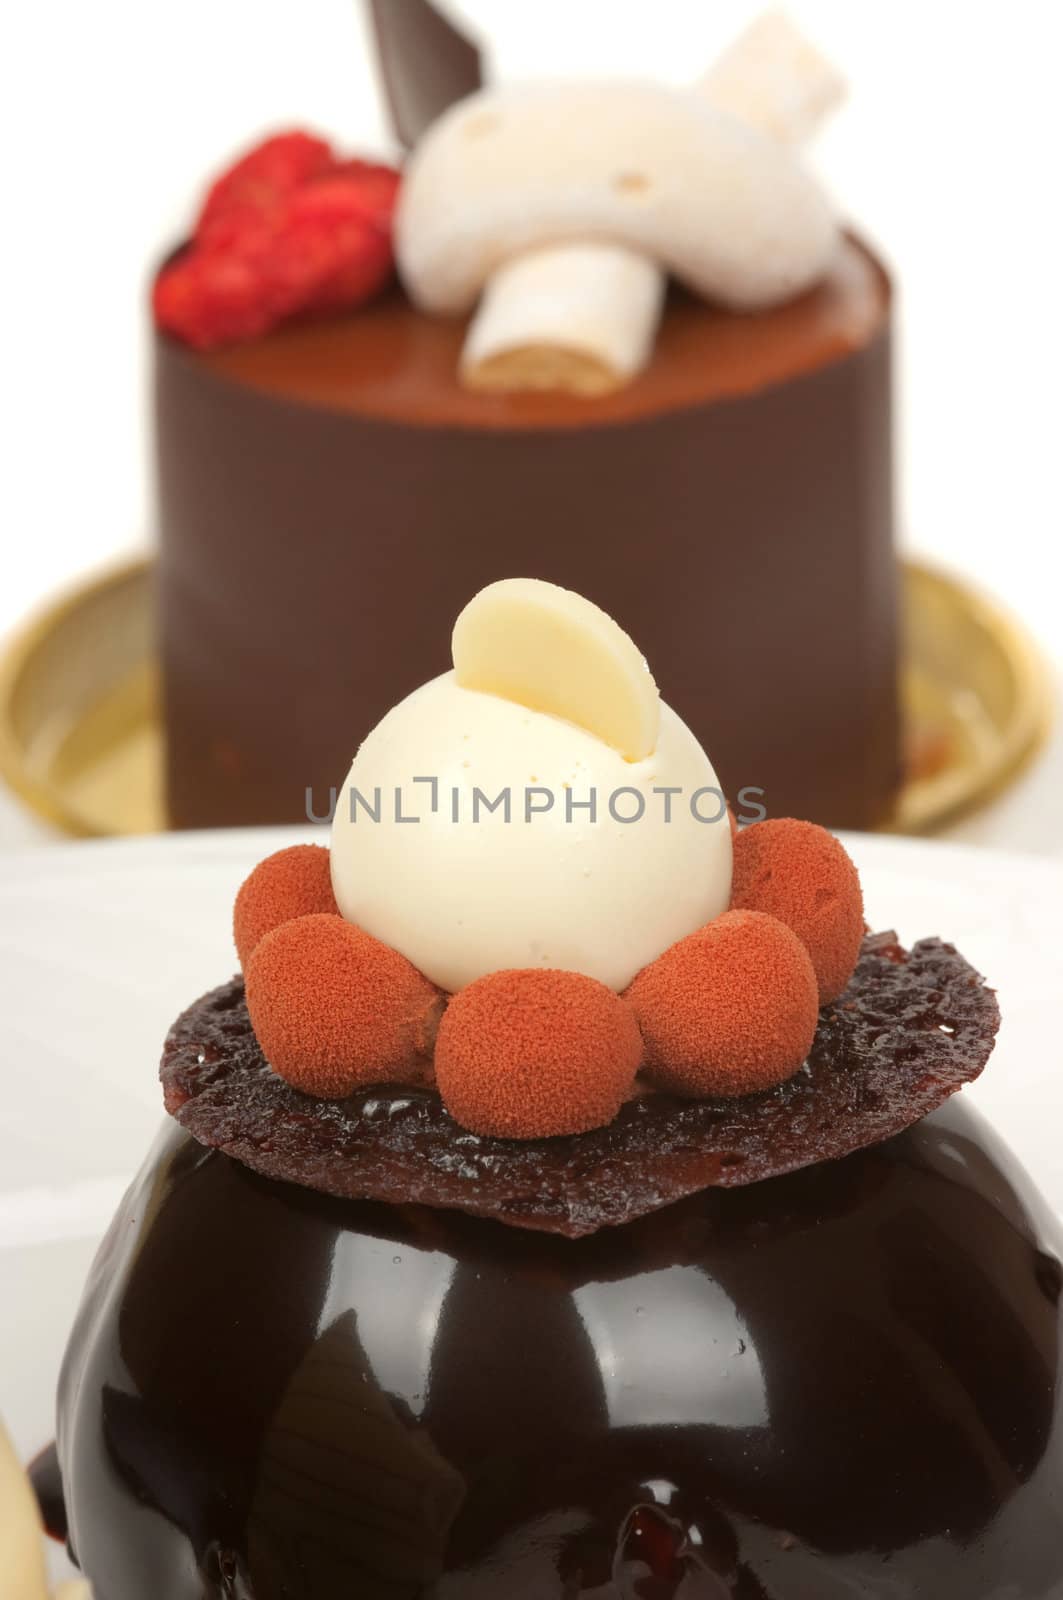 Gourmet French desserts with chocolate and fruit